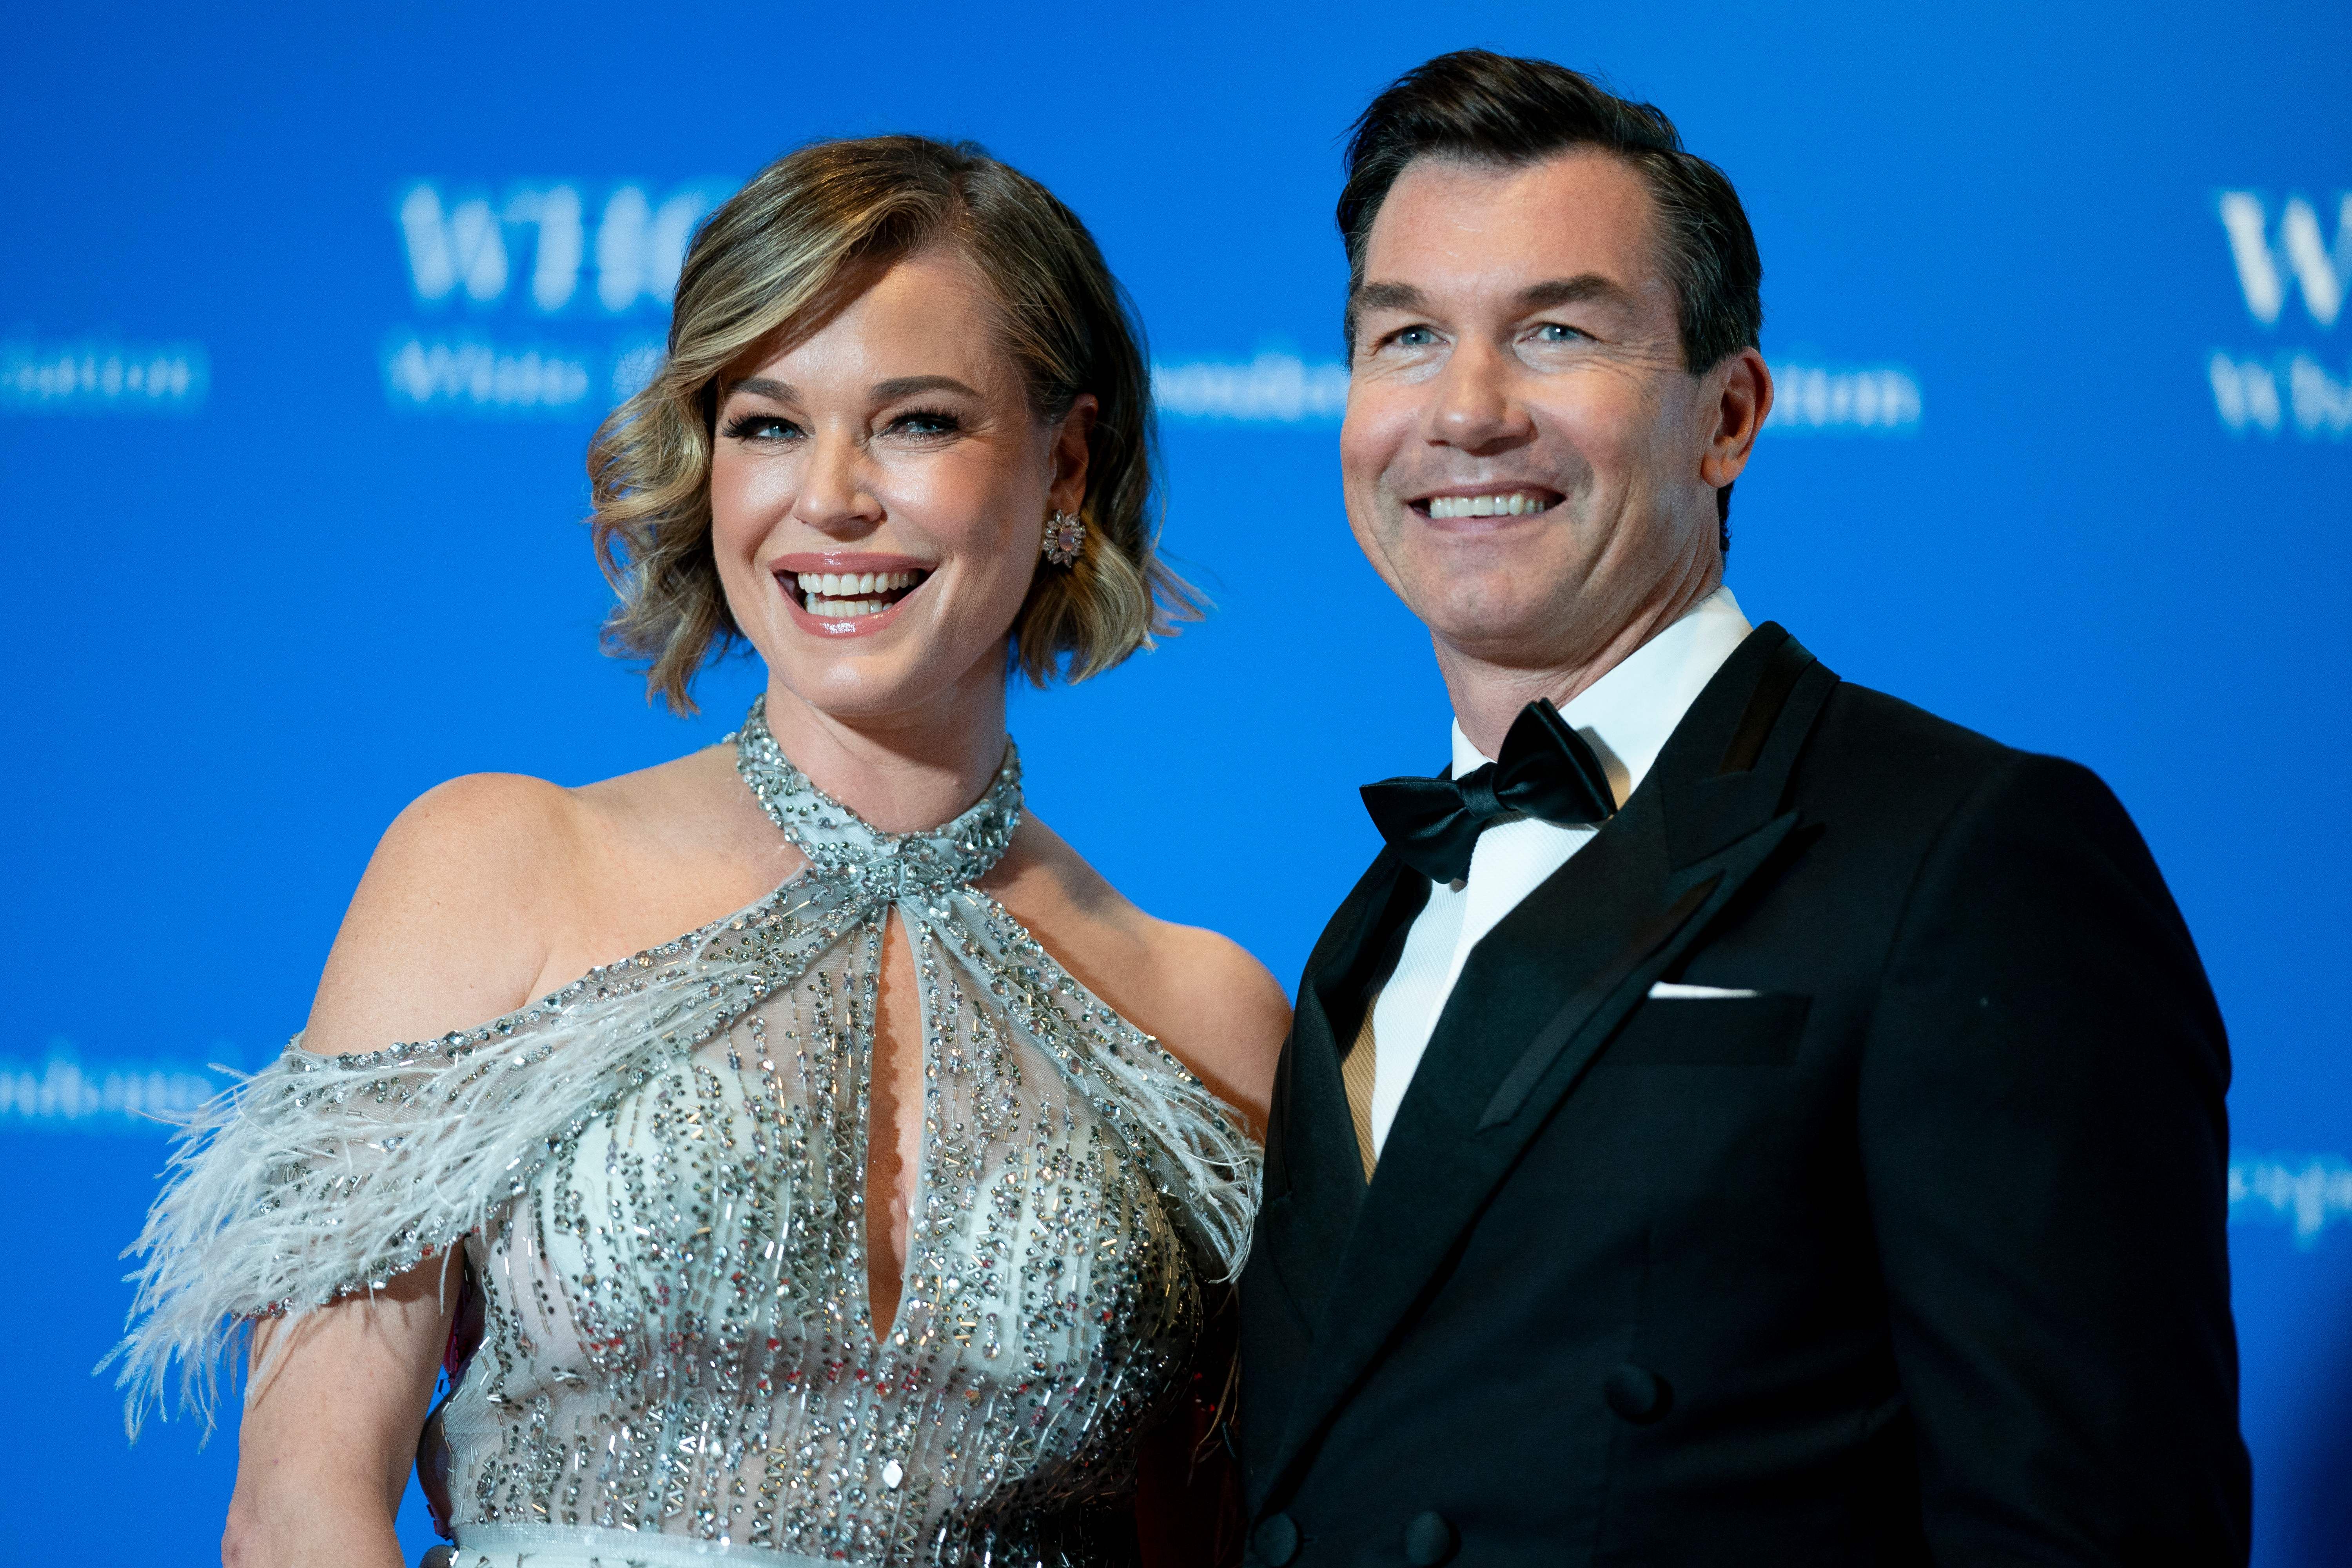 Rebecca Romijn (L) and Jerry O'Connell arrive for the White House Correspondents' Association dinner 